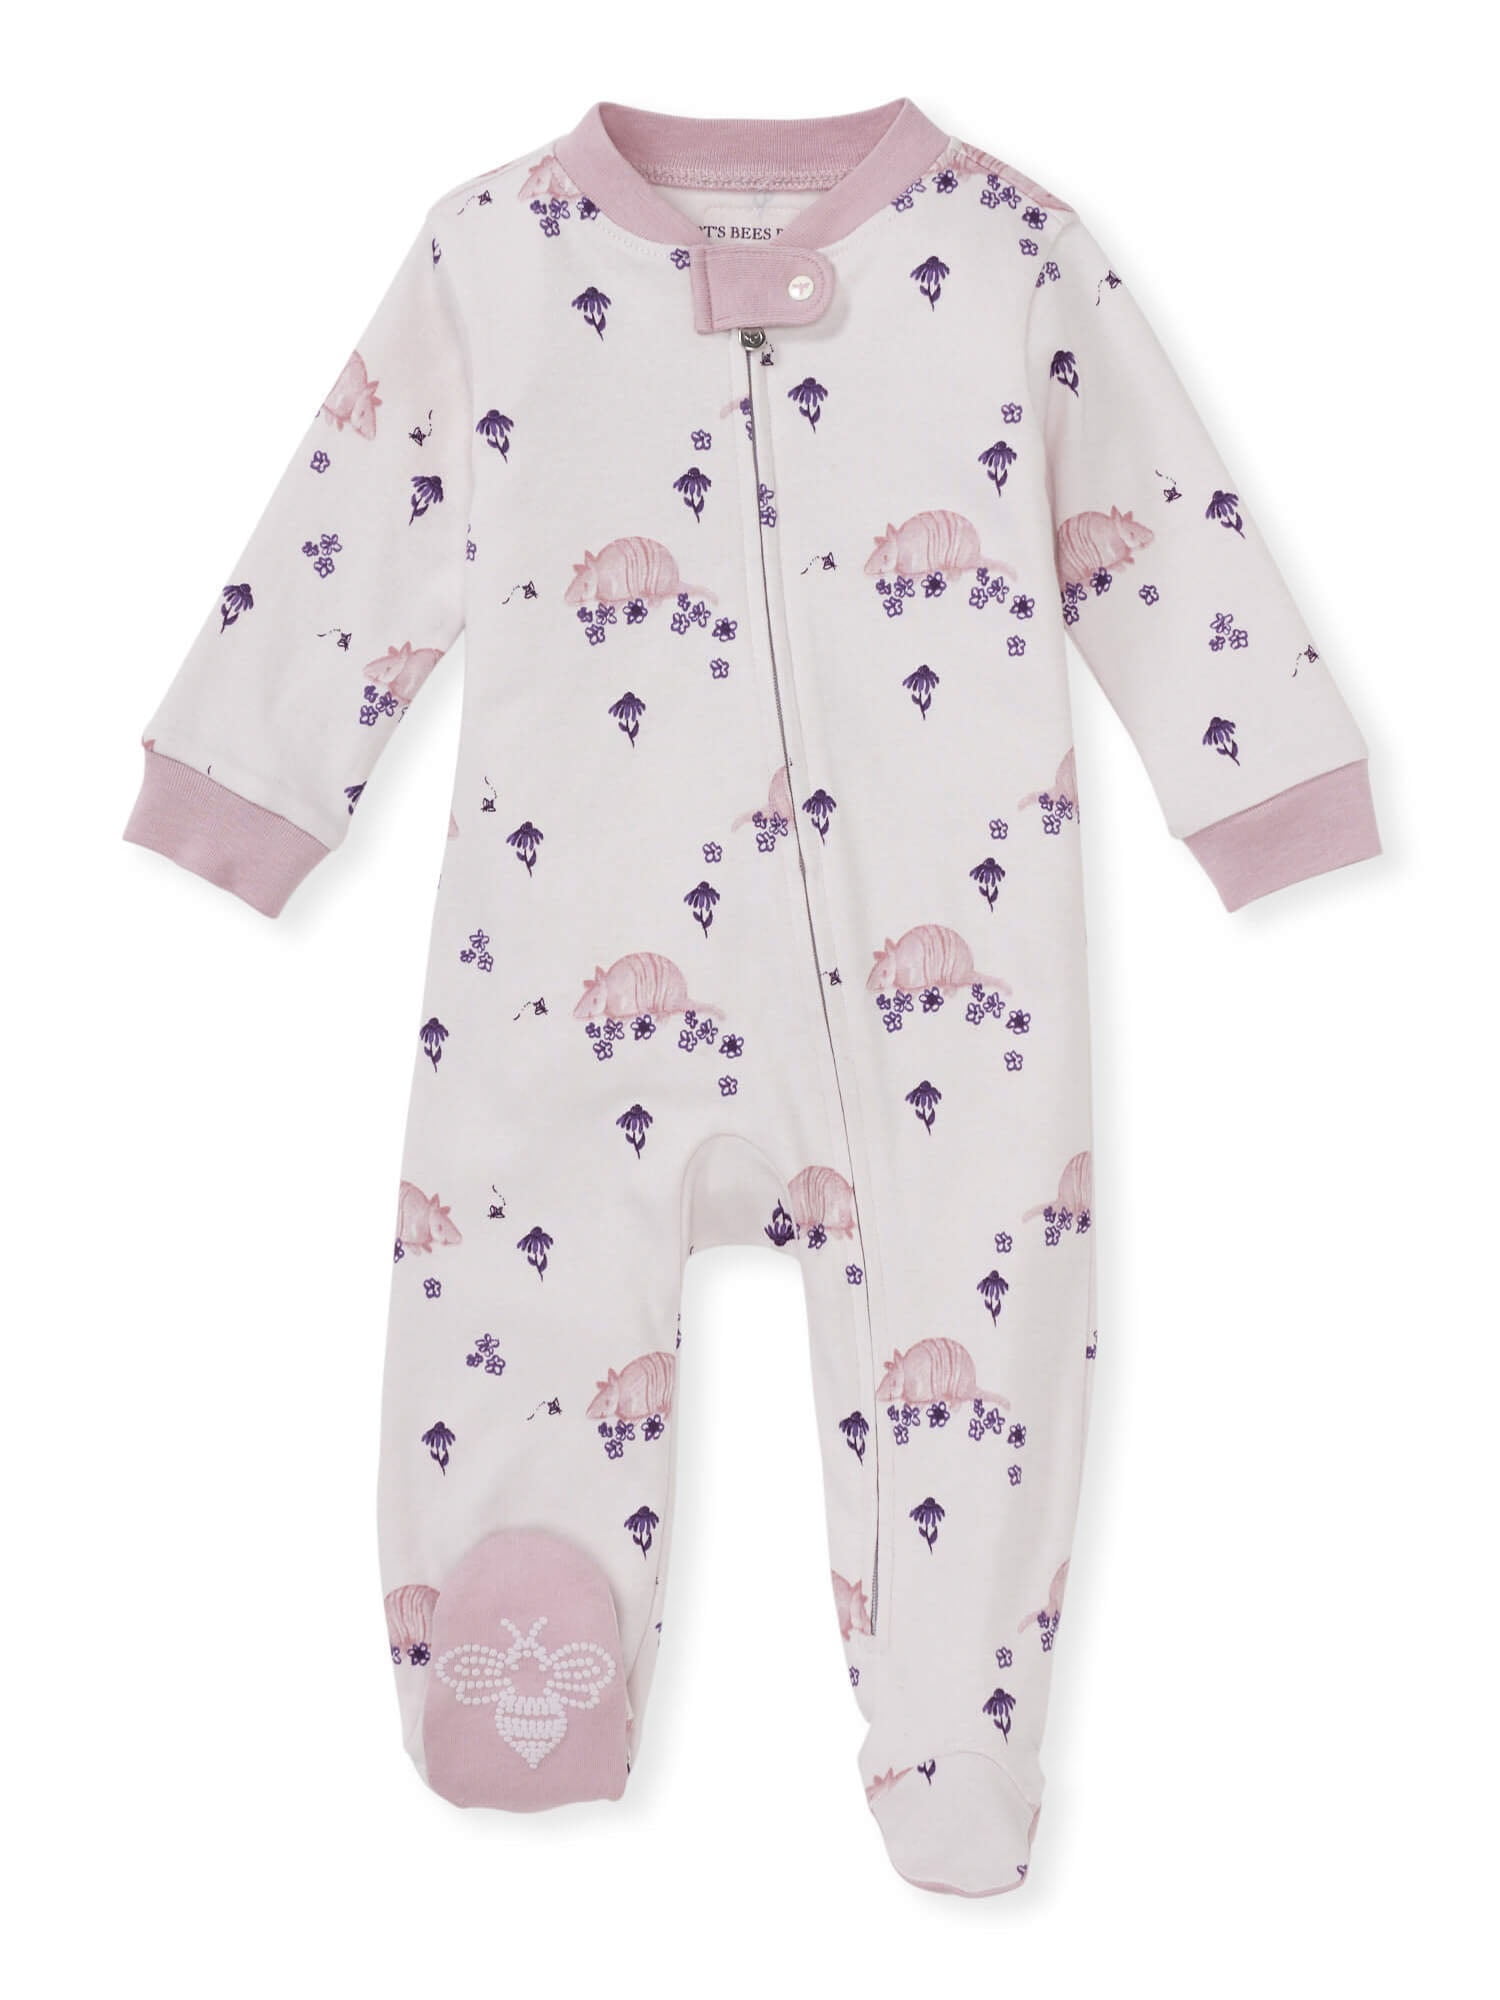 Button Front Footed Pajama Baby Unisex Baby Sleep & Play Organic One-Piece Romper-Jumpsuit PJ